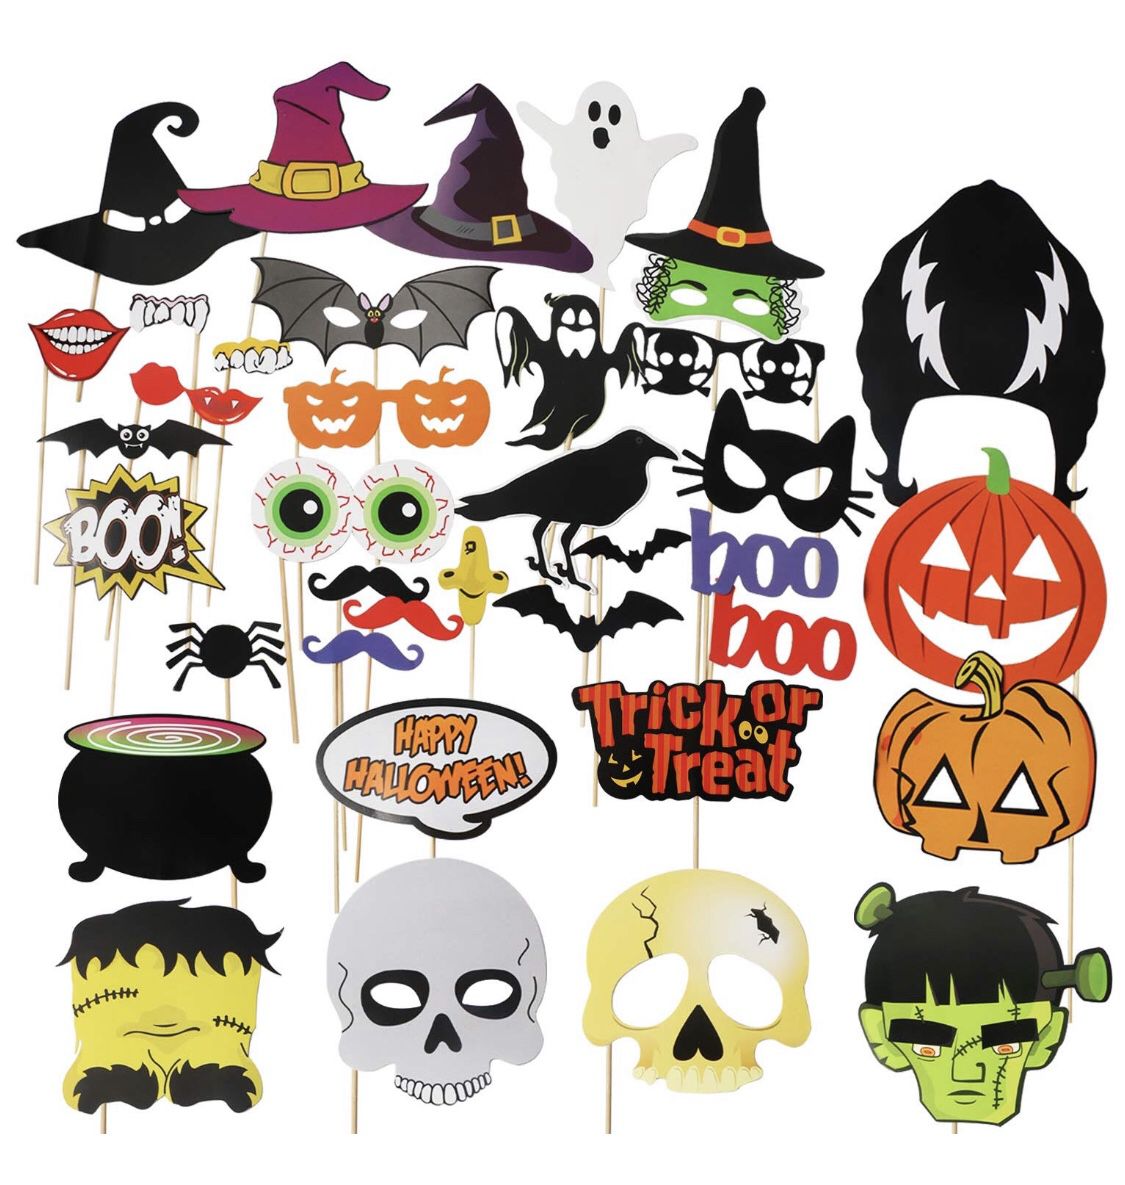 Halloween Photo Booth Props 38pcs DIY Photo Props Hats Lips Bats Terror Skull Masks On a Stick for Happy Halloween Party